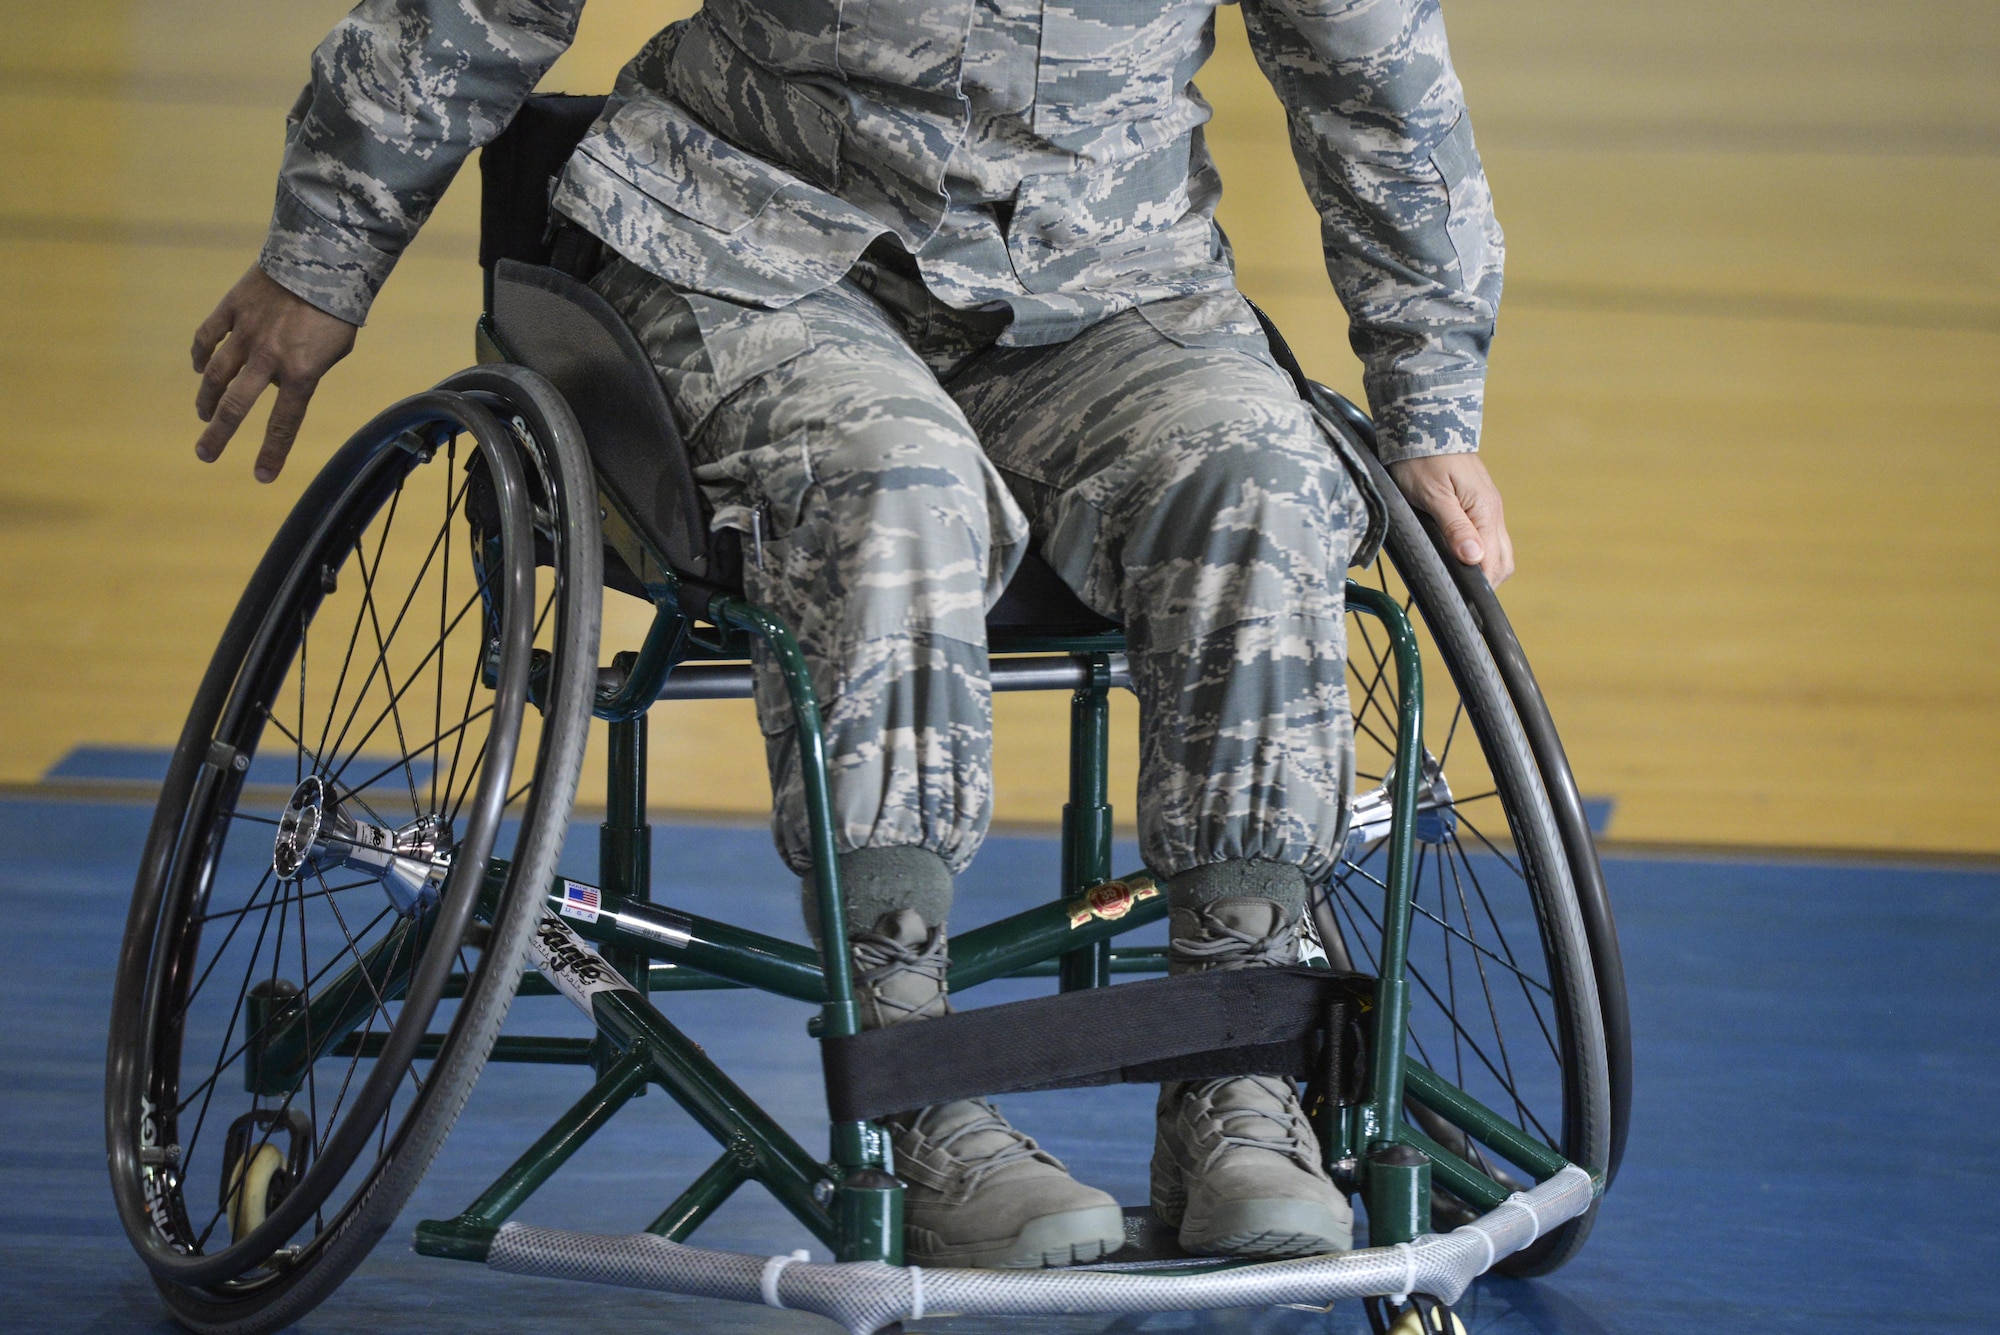 Service members participate in the 2nd annual wheelchair basketball game held as part of the National Disability Awareness Month activities, Oct. 26, at Wright-Patterson Air Force Base. In addition to military members, civilians from around the base were able to play an exhibition game against four members from the Miami Valley Raptors and feel what it is like to play this popular sport while bound to a wheelchair. (U.S. Air Force photo/ Wesley Farnsworth)